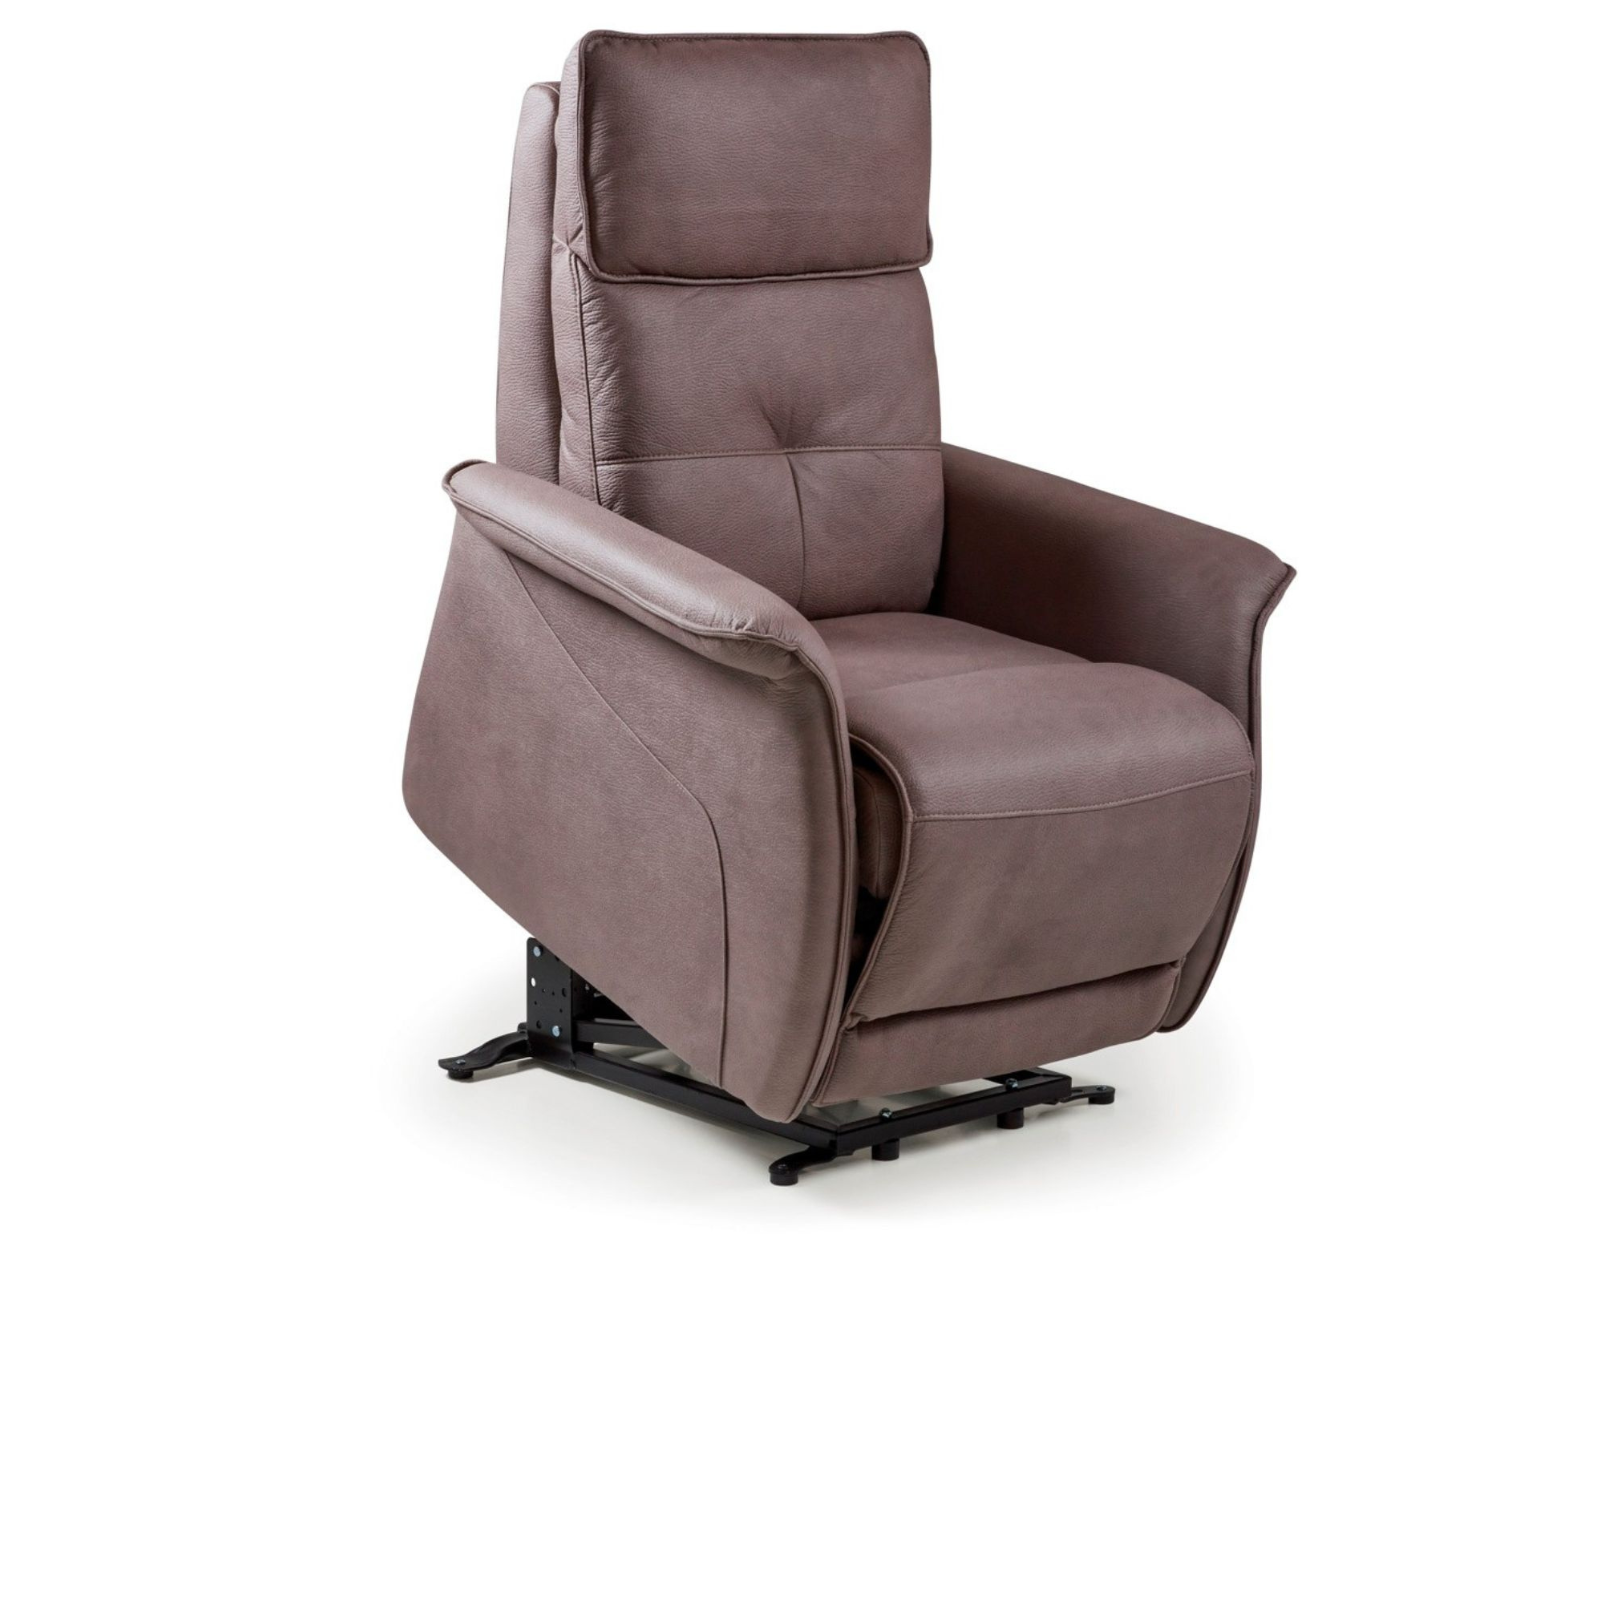 Relaxfauteuil Dundee<br />
